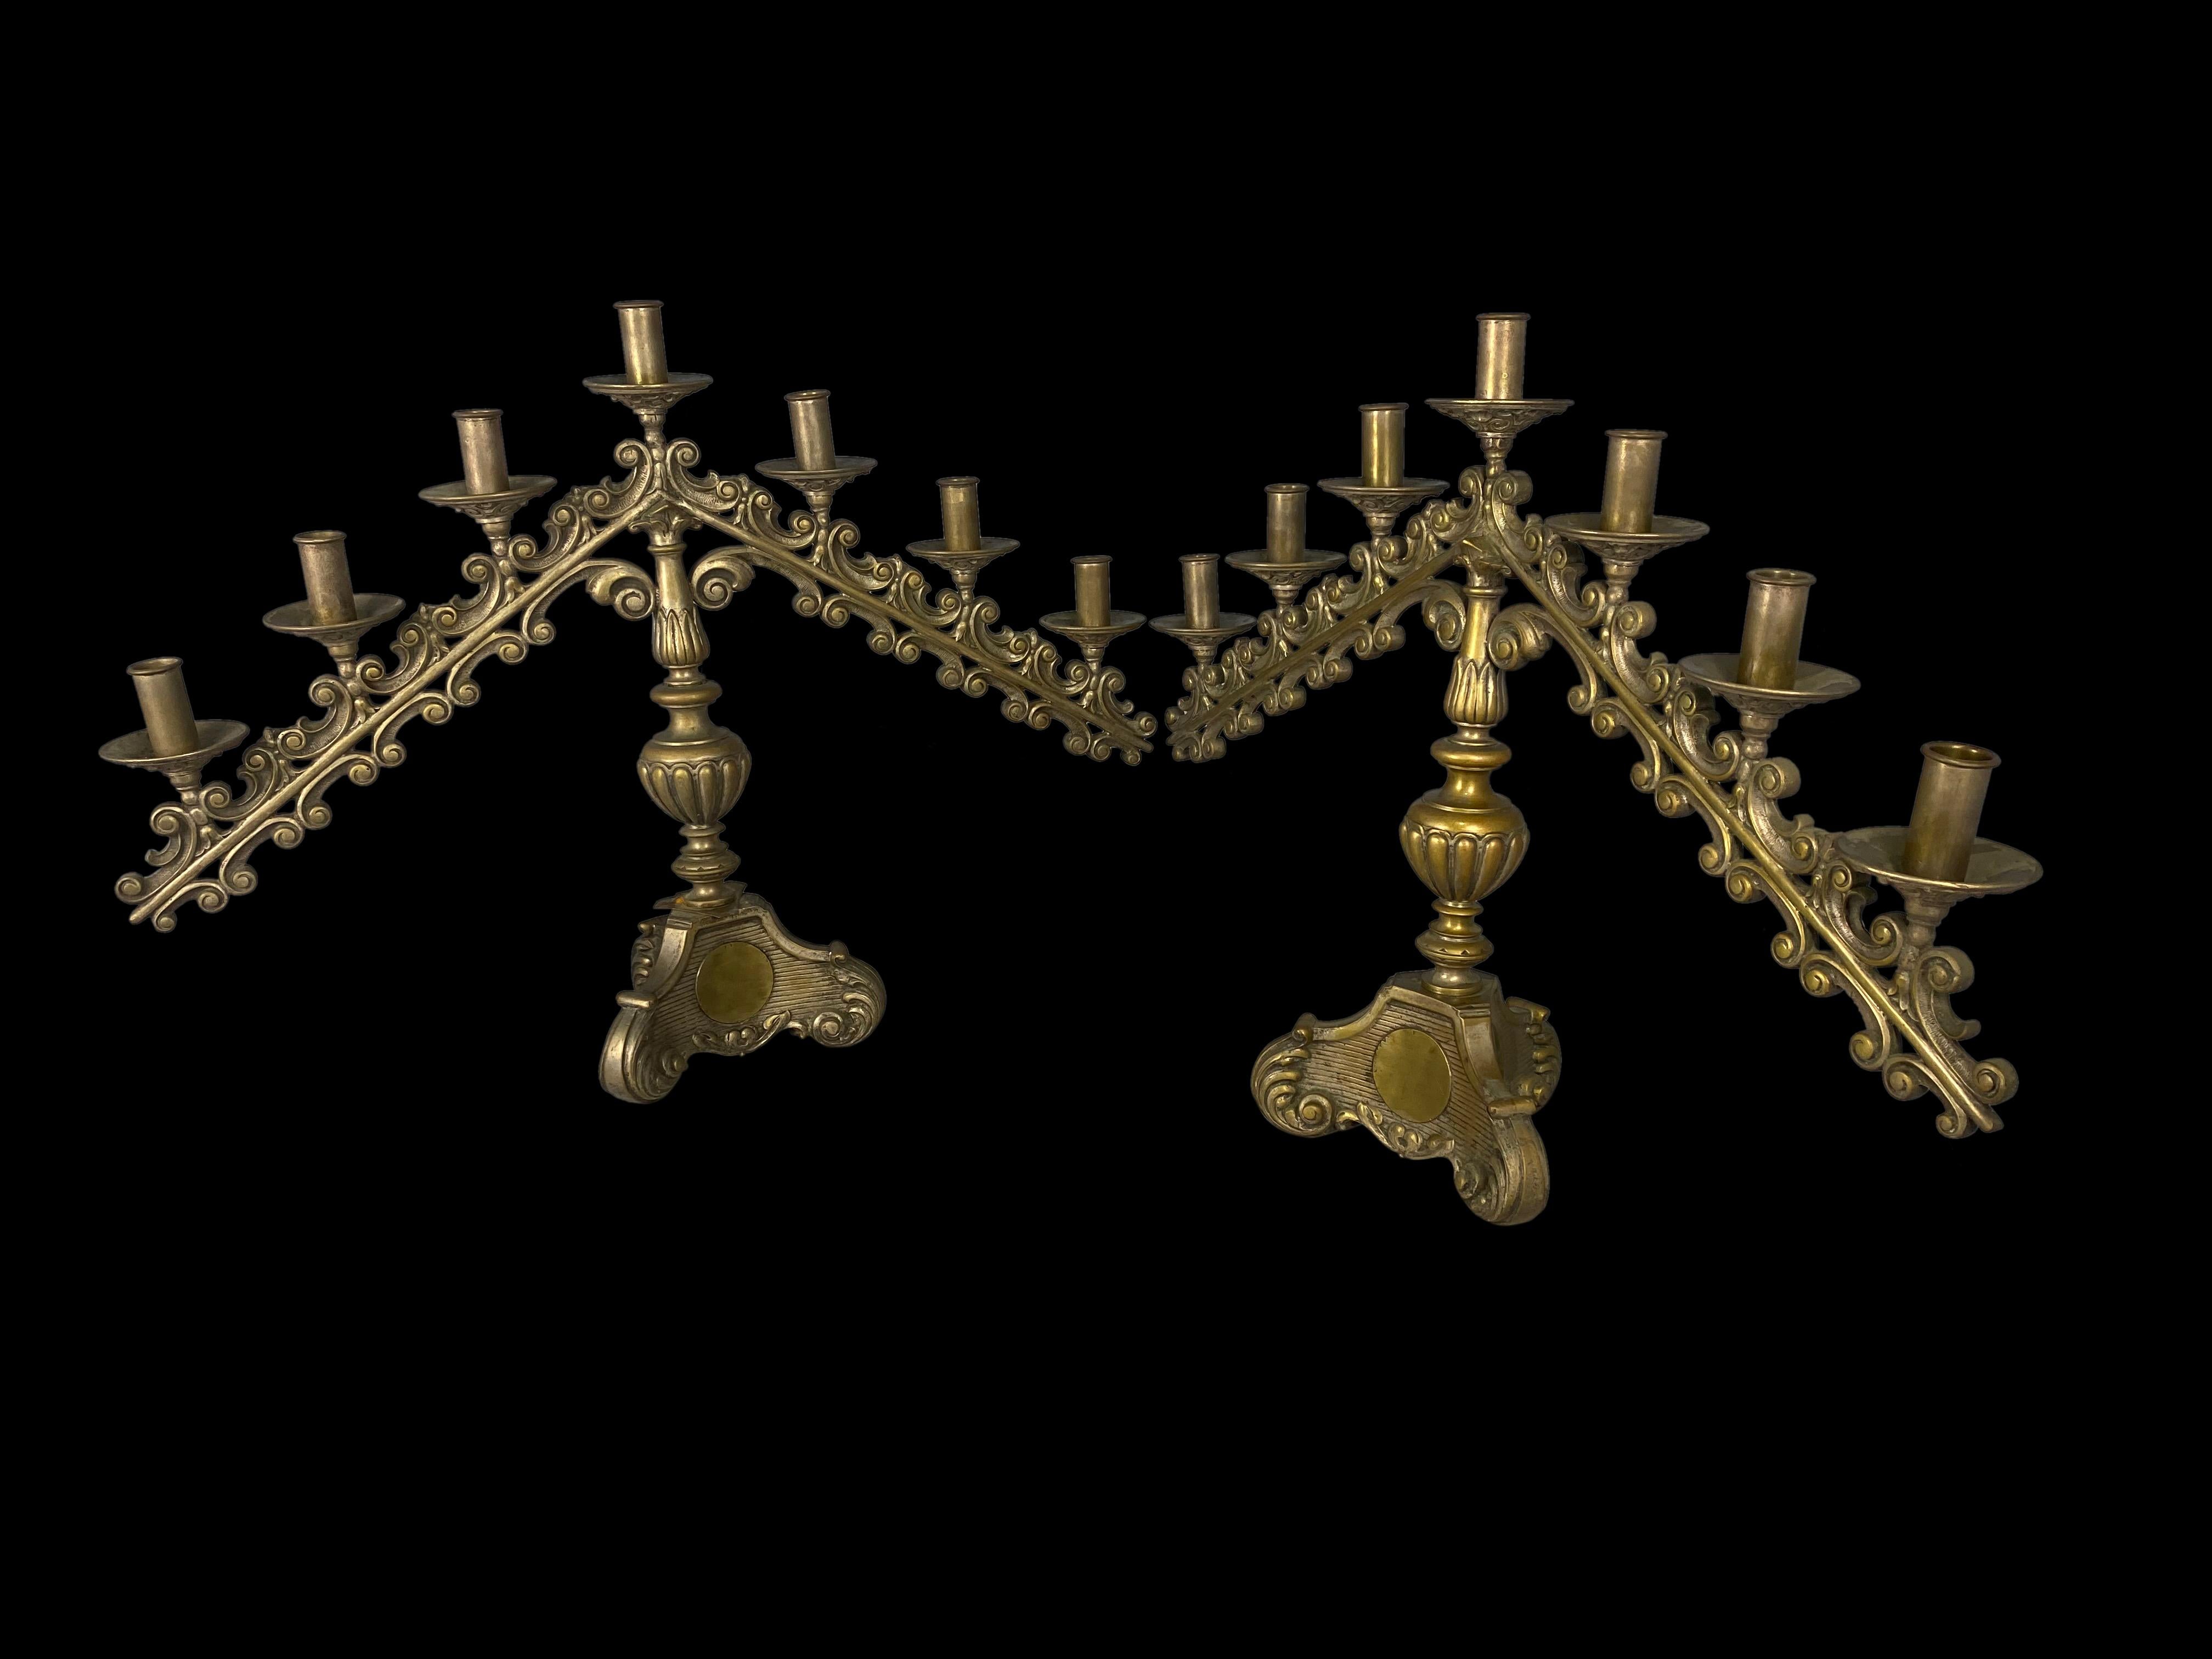 Neoclassical 19th Century Pair of Brass Church Candelabras For Sale